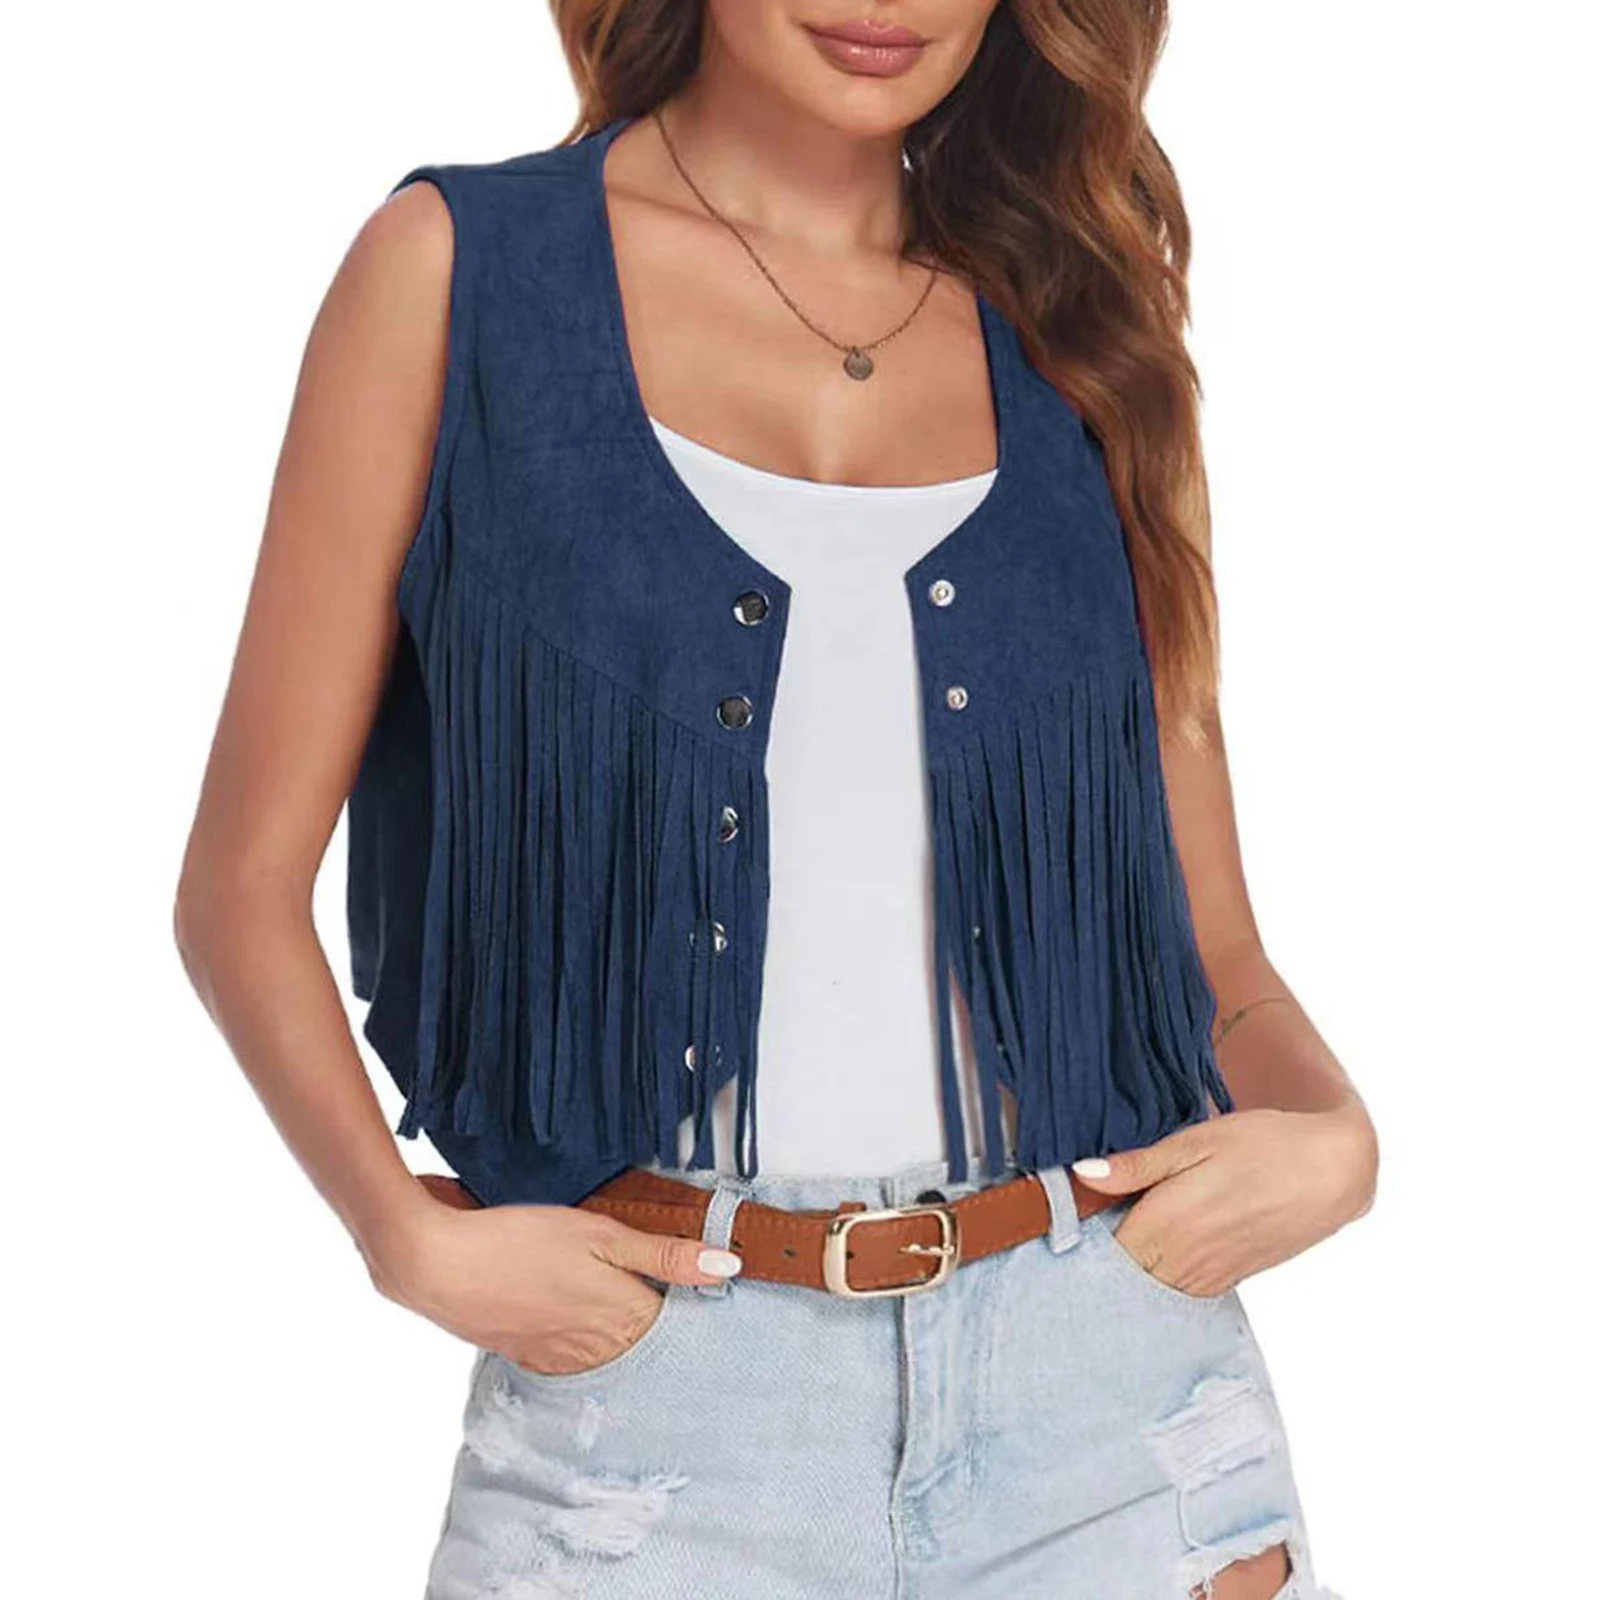 Womens Punk Vintage Fringe Vest Faux Suede Tassel Waistcoat Irregular Hem Sleeveless Jacket for Halloween Party Rock Concert rg laser rgb led effect lighting party light with remote controller auto mode sound control for dj nightclub party show concert